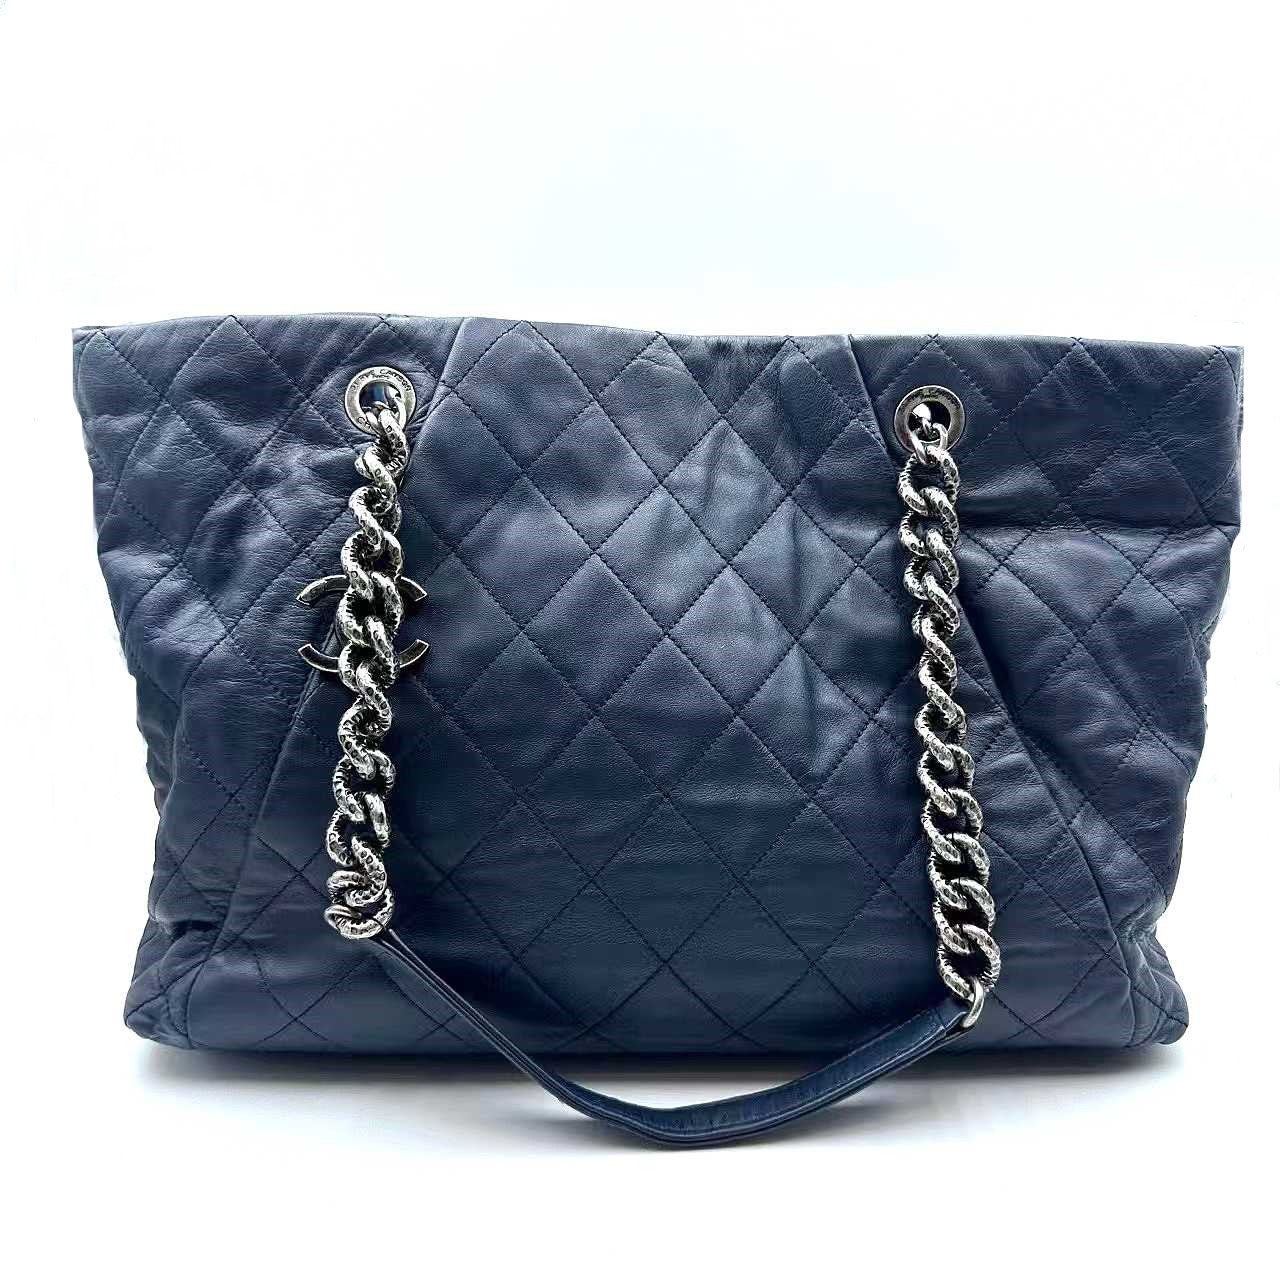 Quilted Leather Shopping Tote